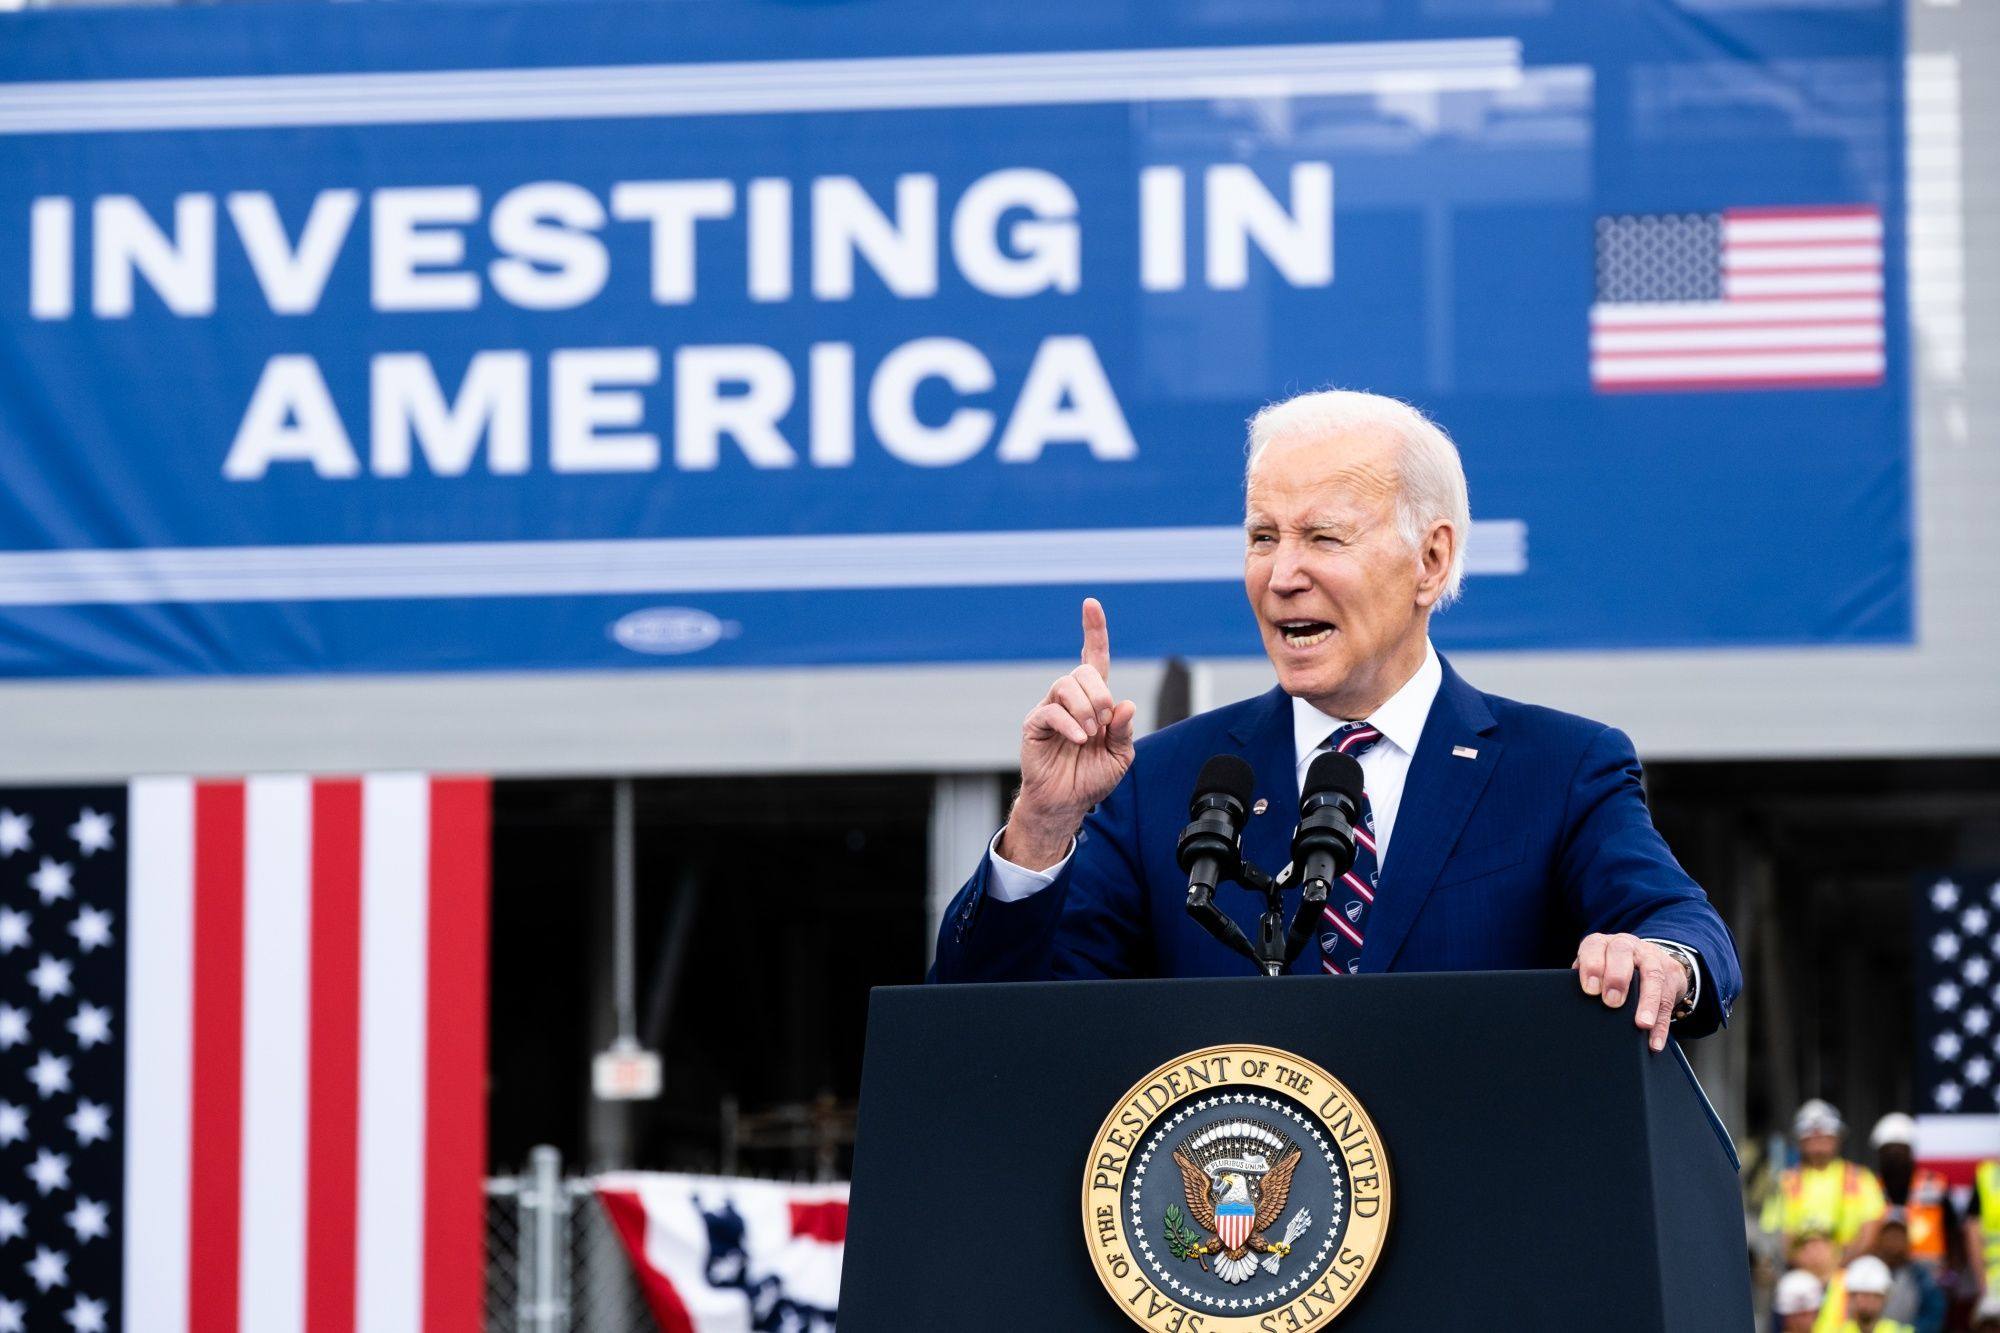 US President Joe Biden speaks at an event in Durham, North Carolina, on March 28. The Peterson Institute has highlighted the fallacies that underpin US trade policy, including a mistaken belief that subsidies or “on-shoring” will benefit the US economy. Photo: Bloomberg